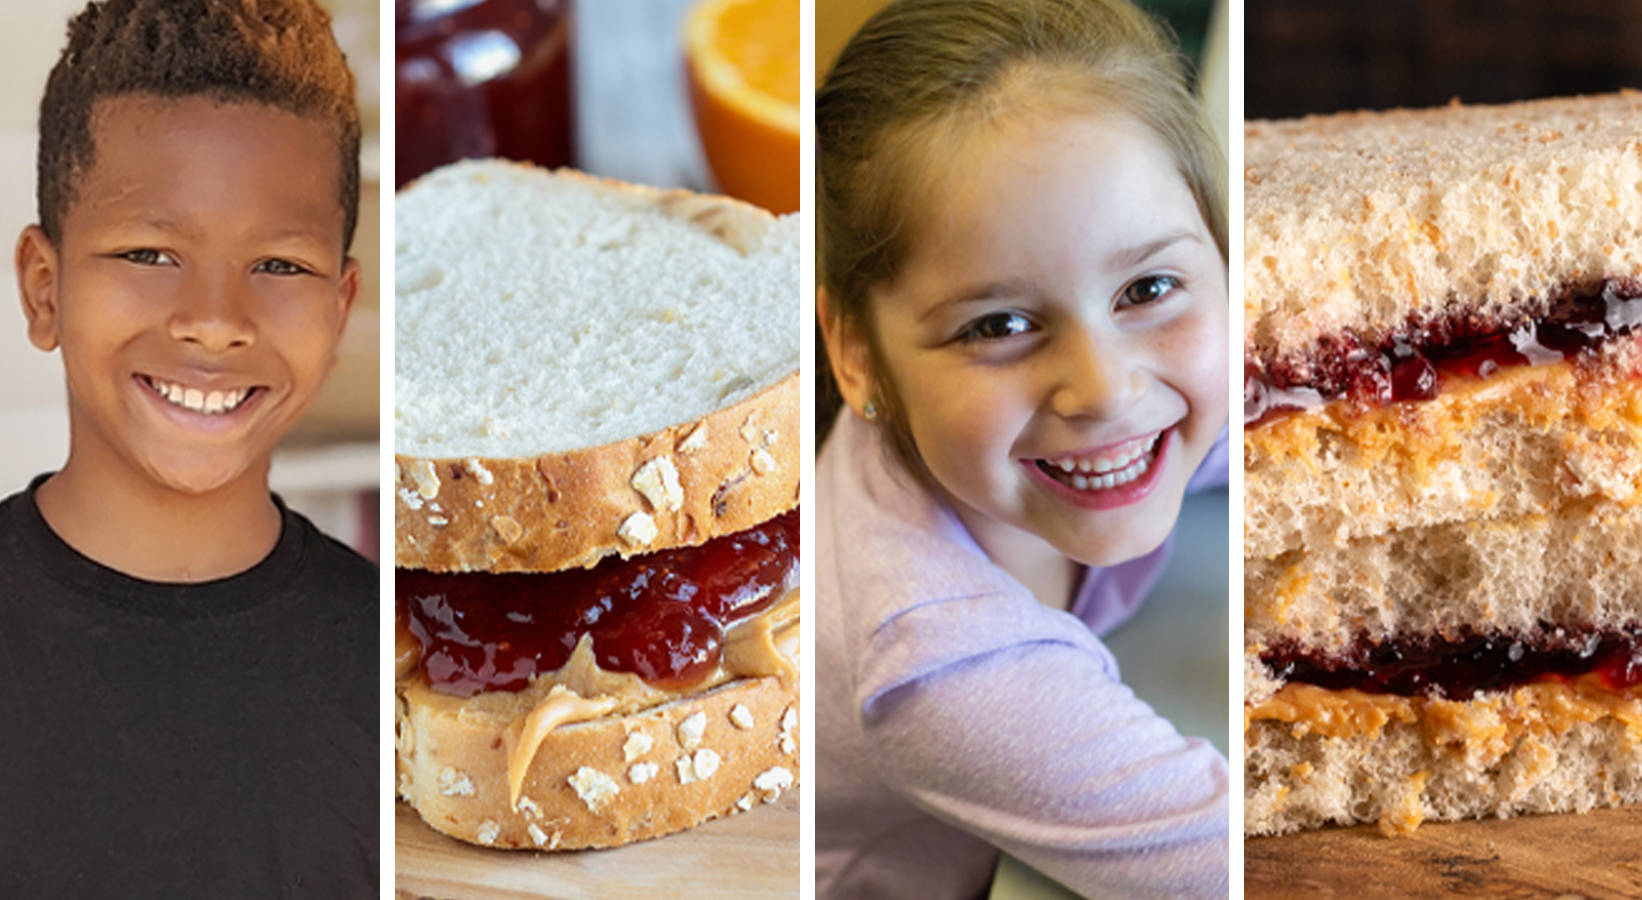 Photos of children and peanut butter & jelly sandwiches